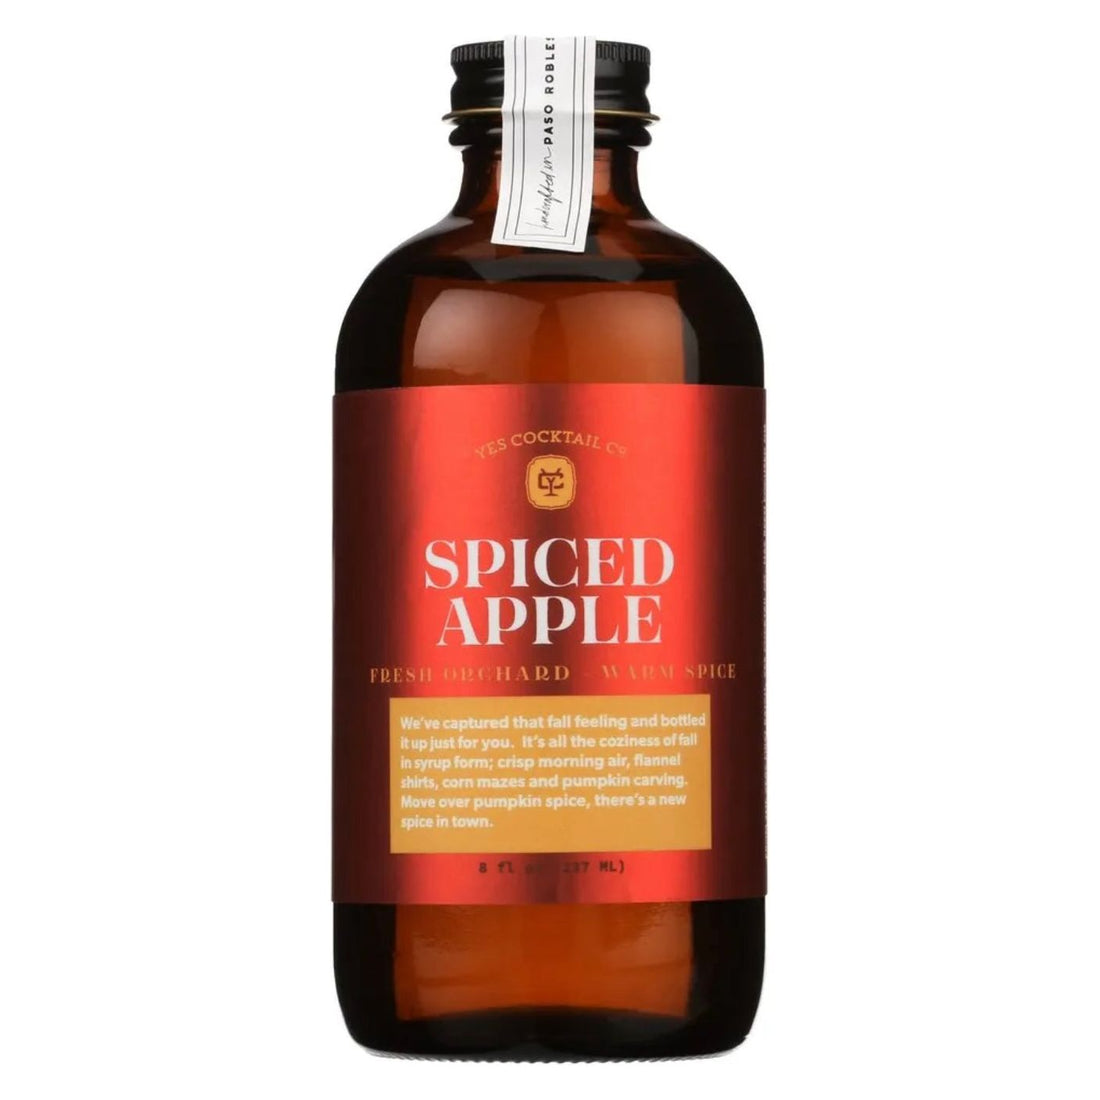 Spiced Apple - Yes Cocktail